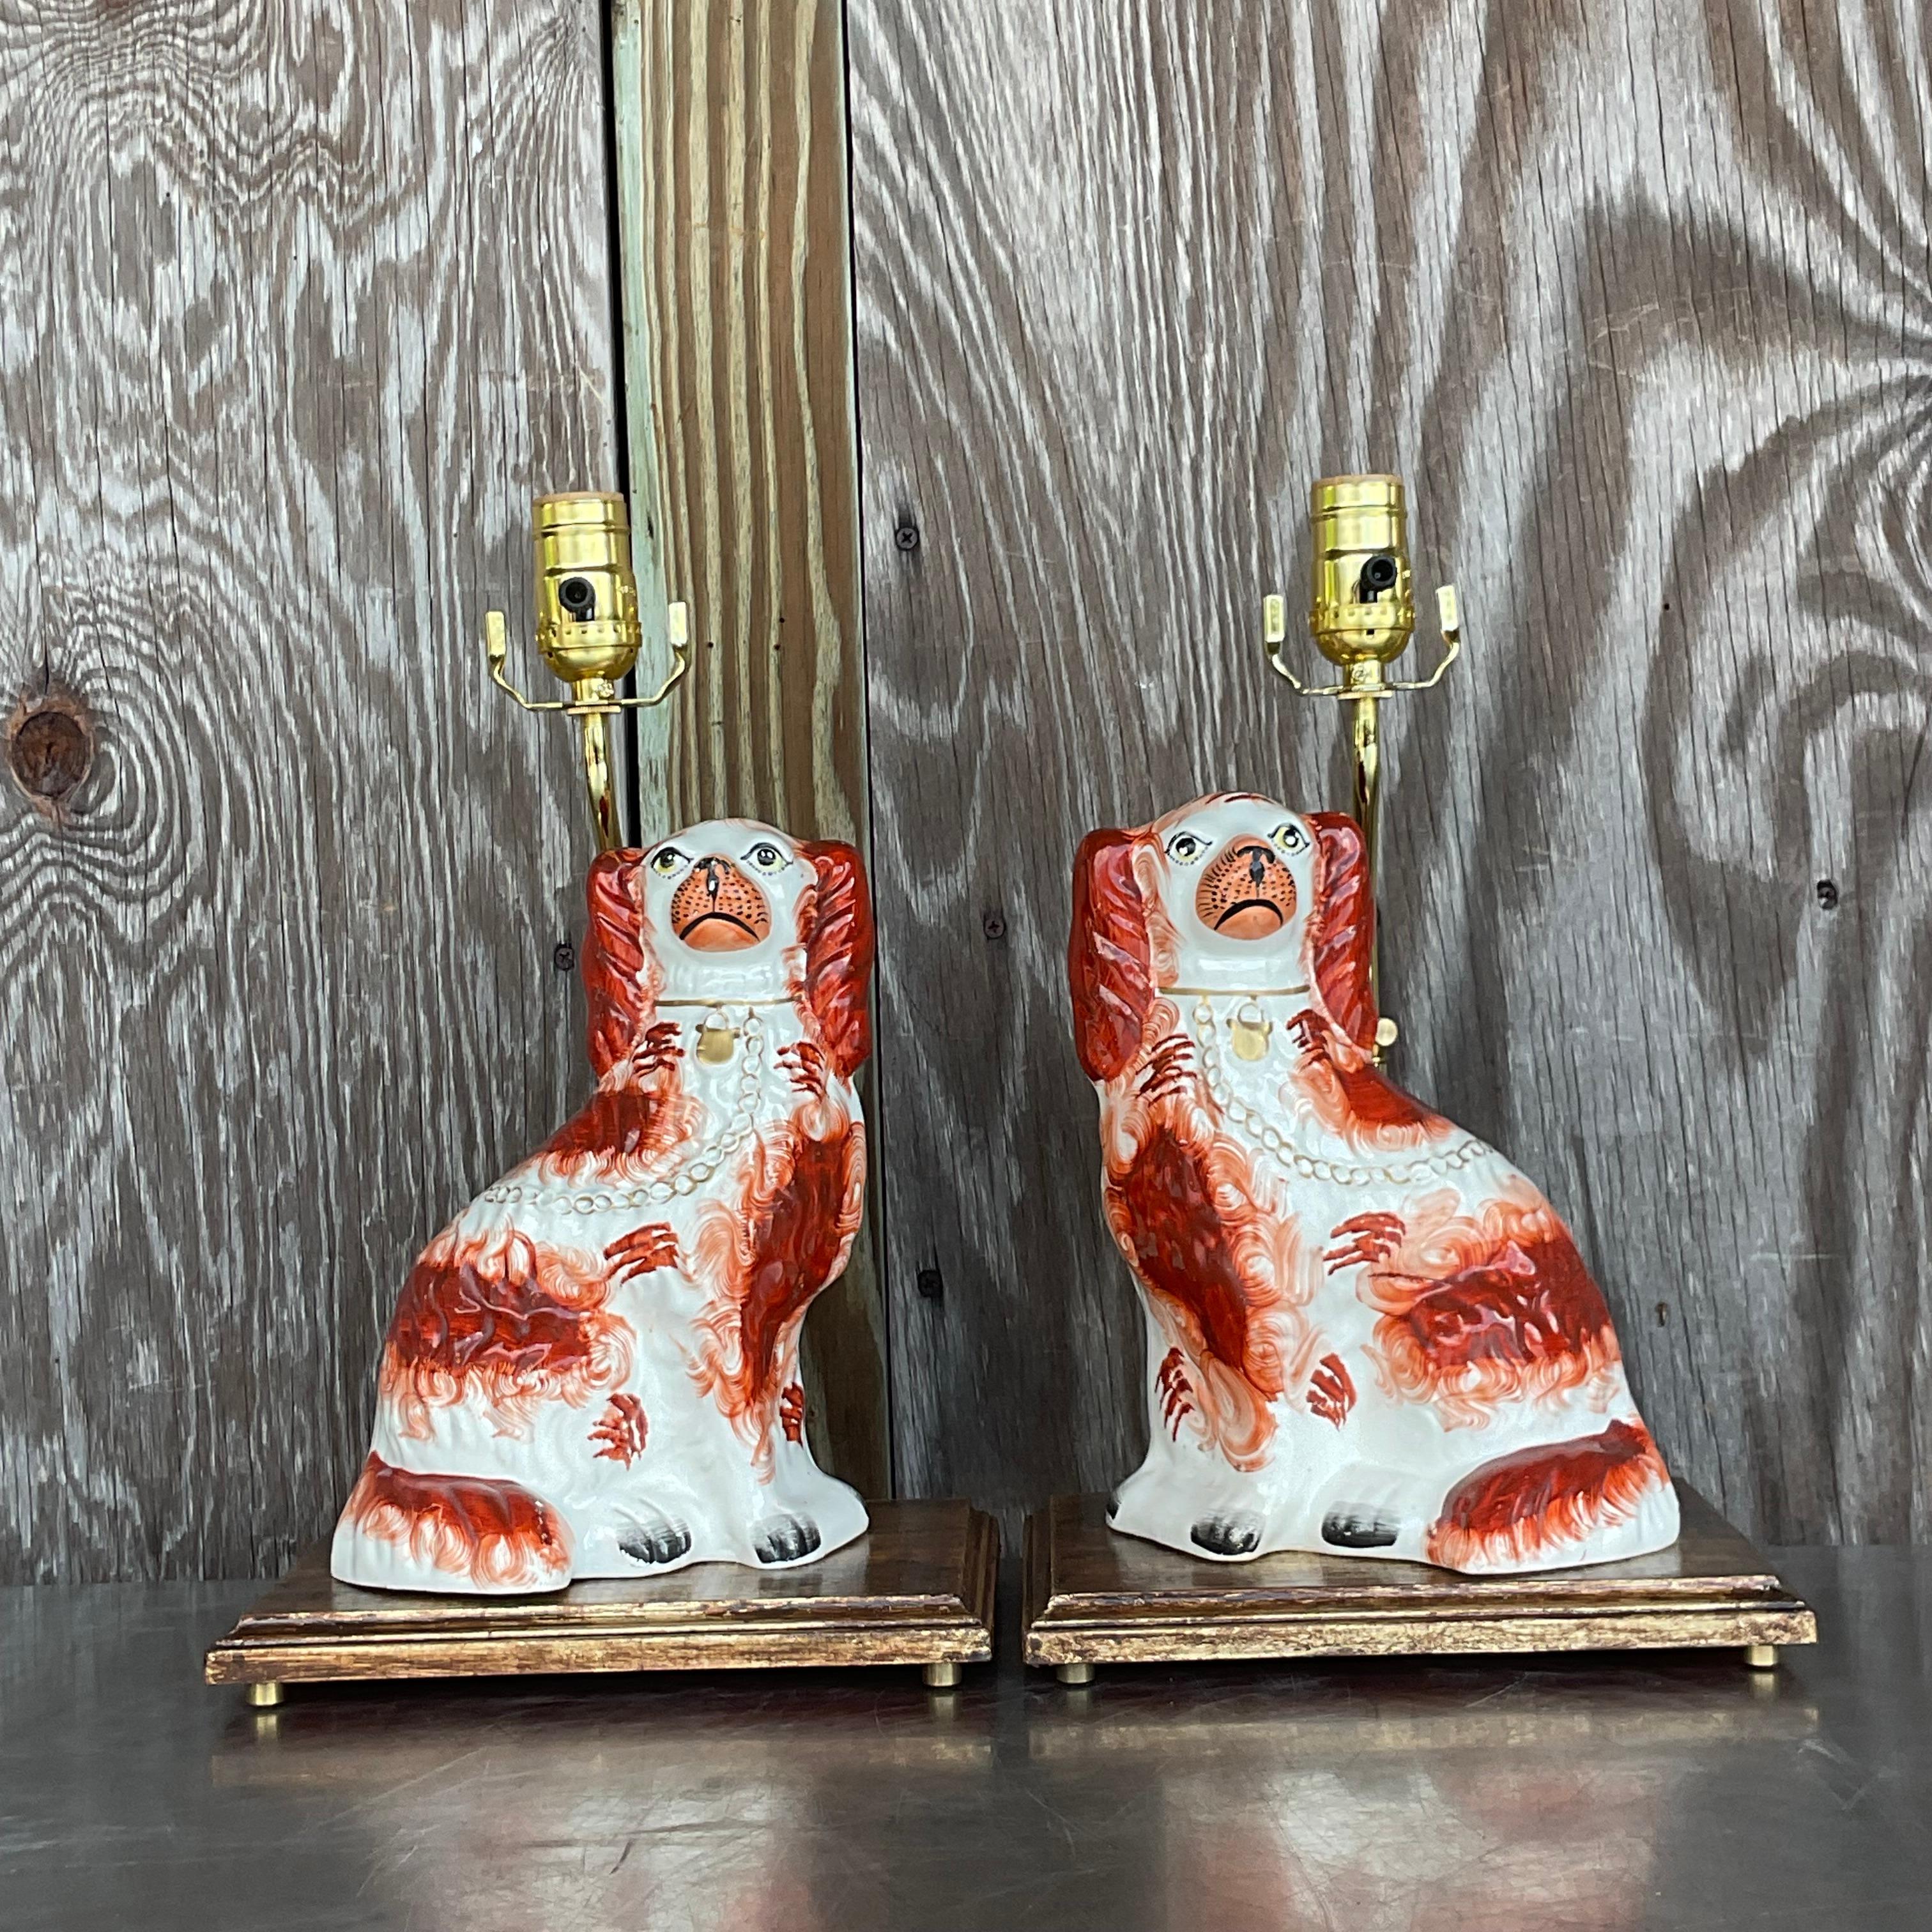 American Vintage Regency Staffordshire Style Dog Table Lamps - a Pair For Sale